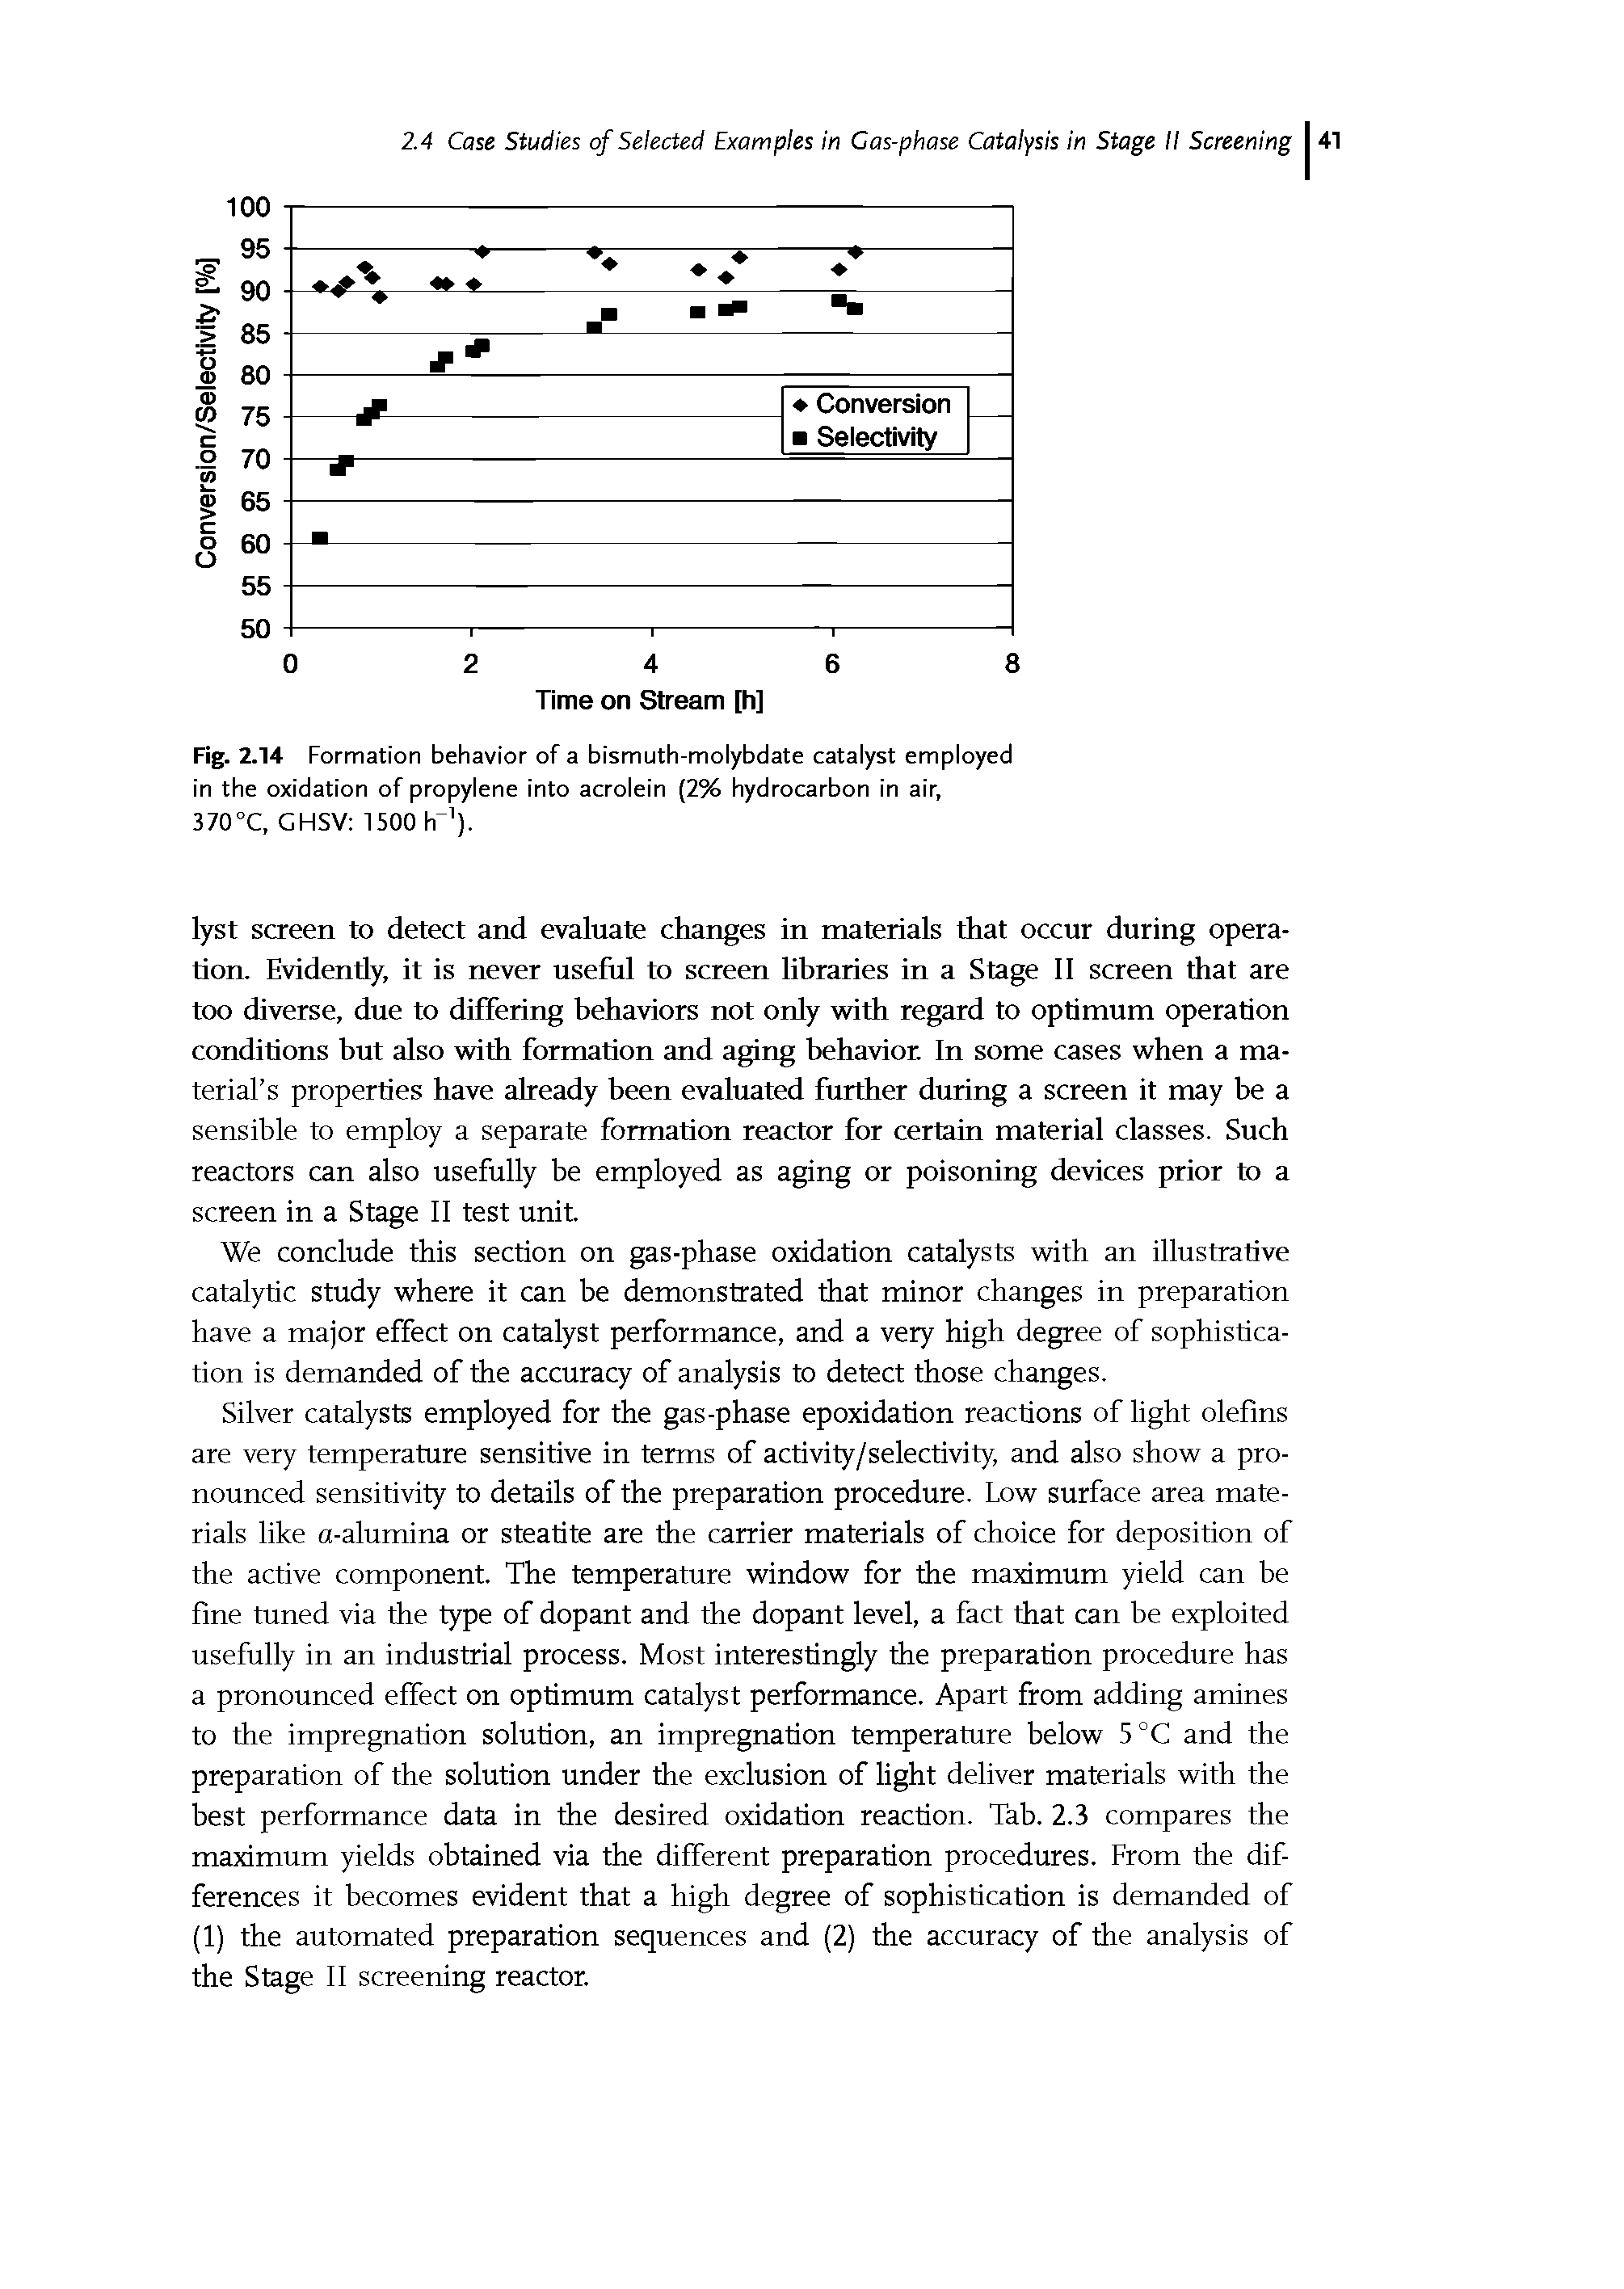 Fig. 2.14 Formation behavior of a bismuth-molybdate catalyst employed in the oxidation of propylene into acrolein (2% hydrocarbon in air, 370°C, GHSV 1500 hr1).